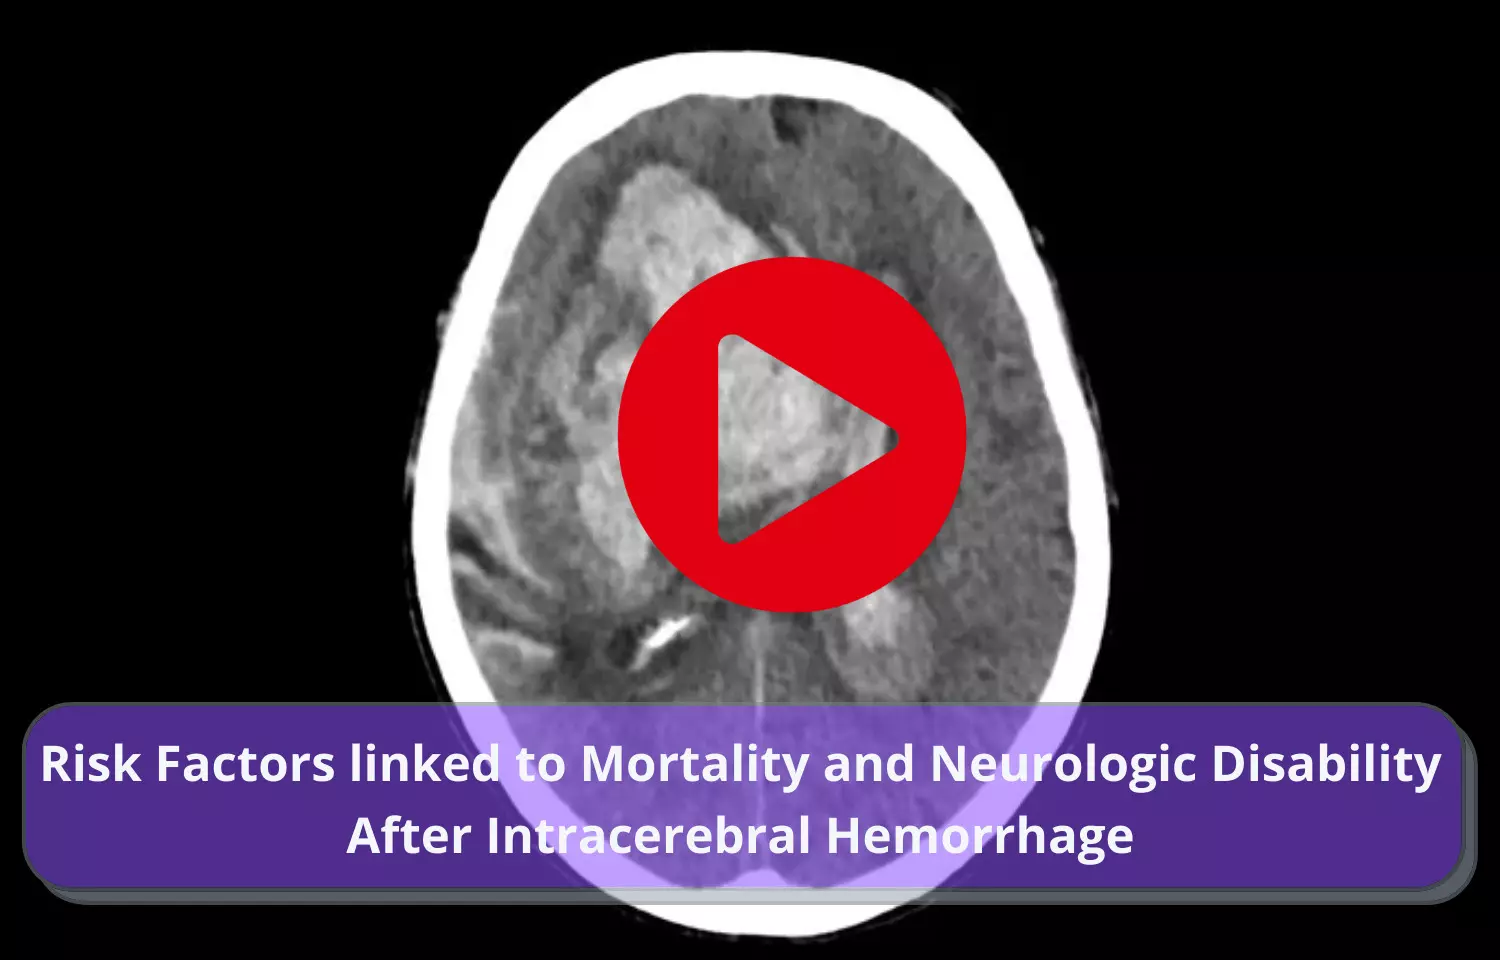 Risk Factors for Mortality and Neurologic Disability After Intracerebral Hemorrhage